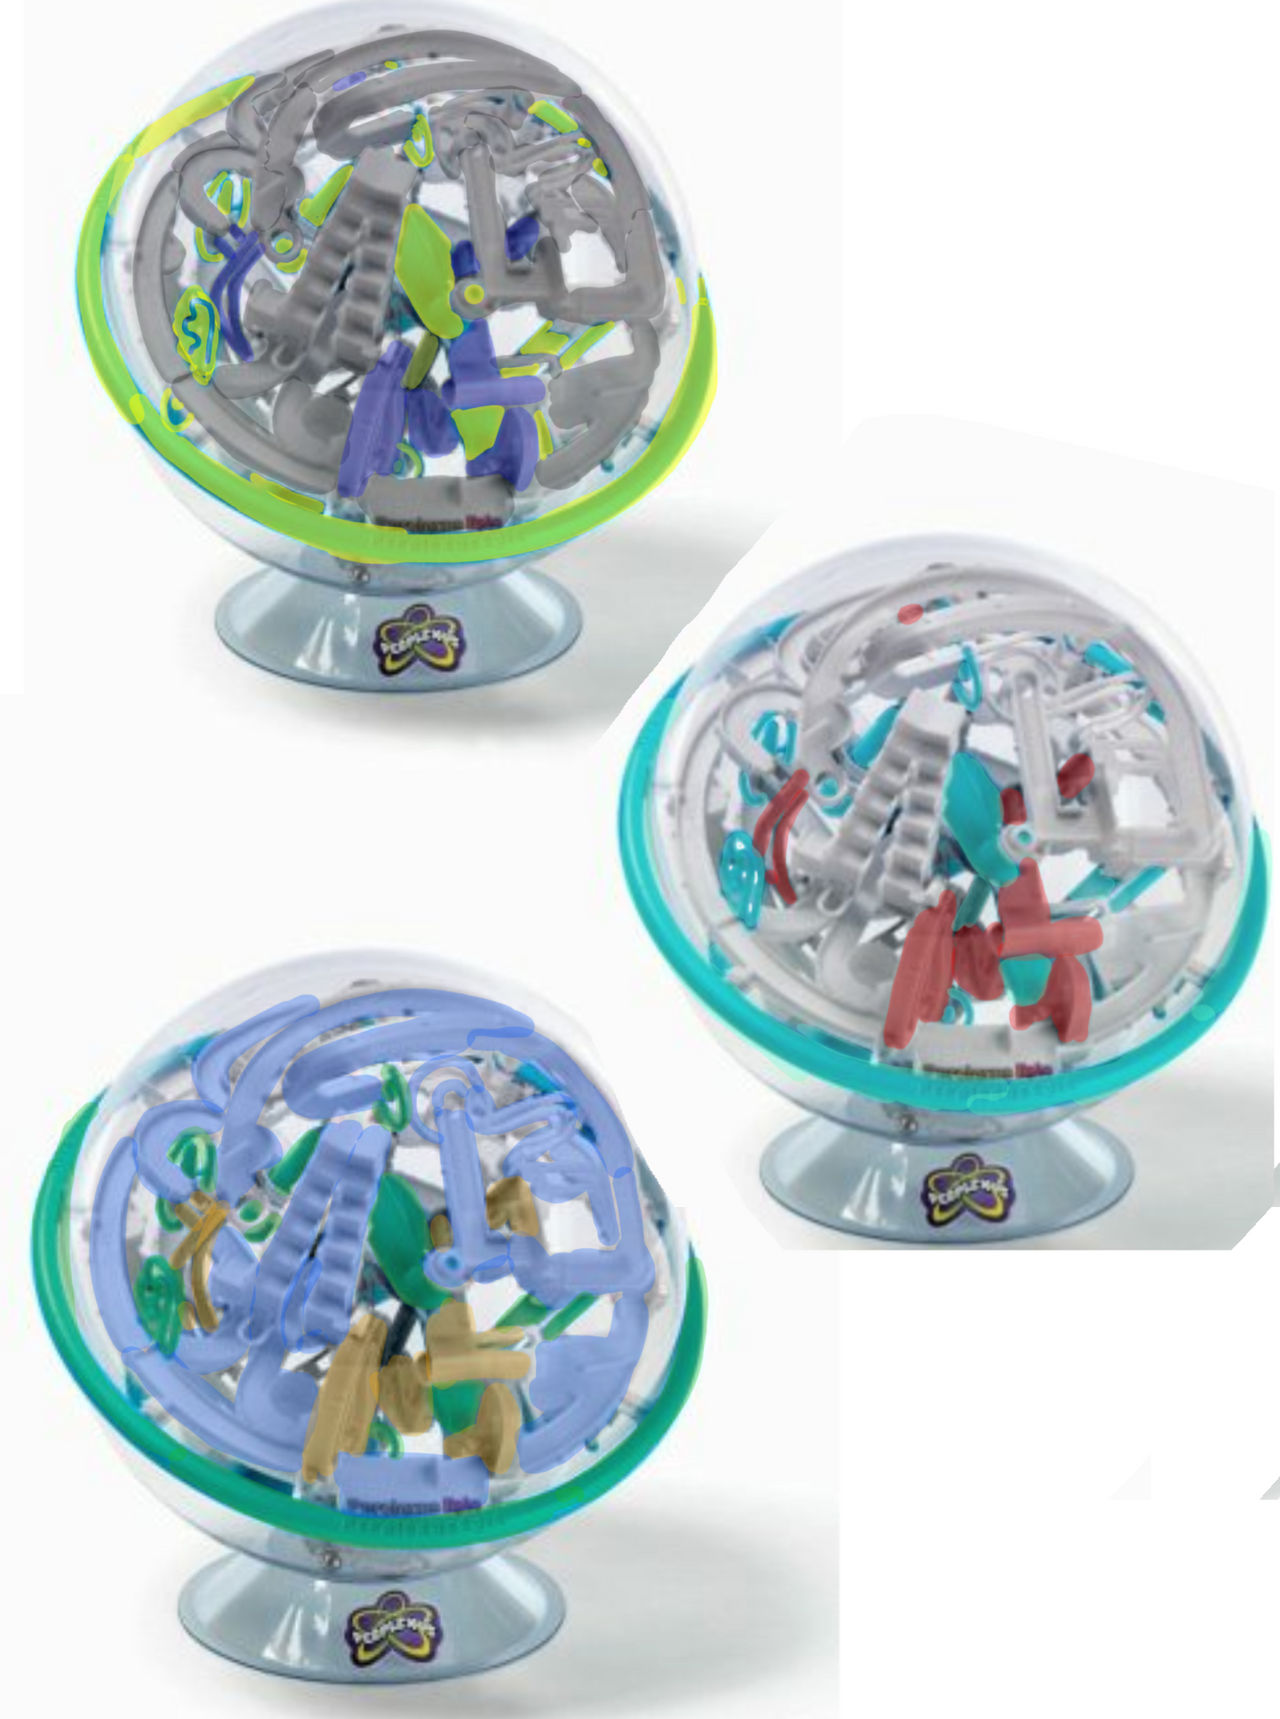 3 Custom Color Schemes for Perplexus Epic by Pooty66666 on DeviantArt